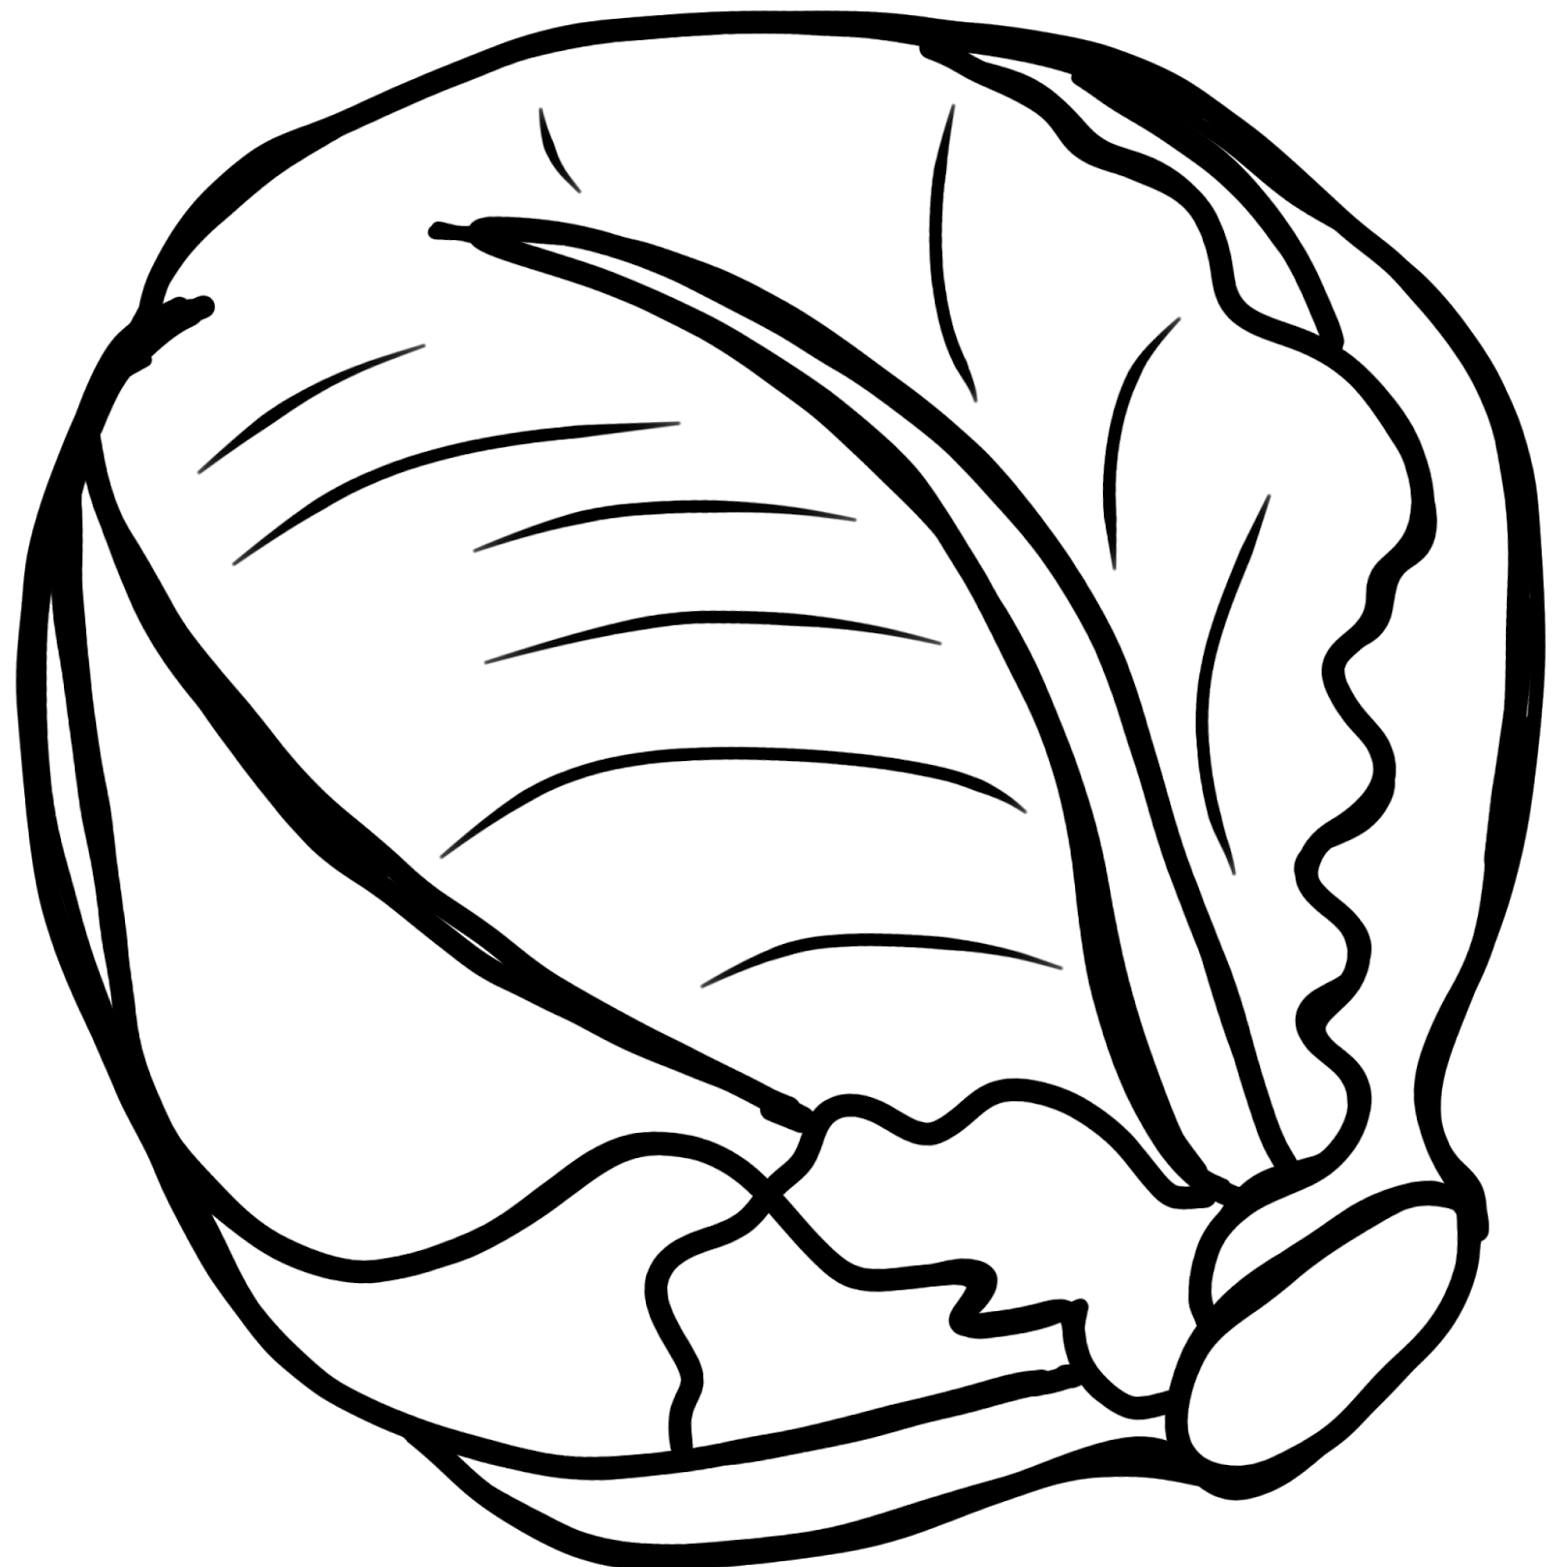 Cabbage drawing at getdrawings. Lettuce clipart coloring page